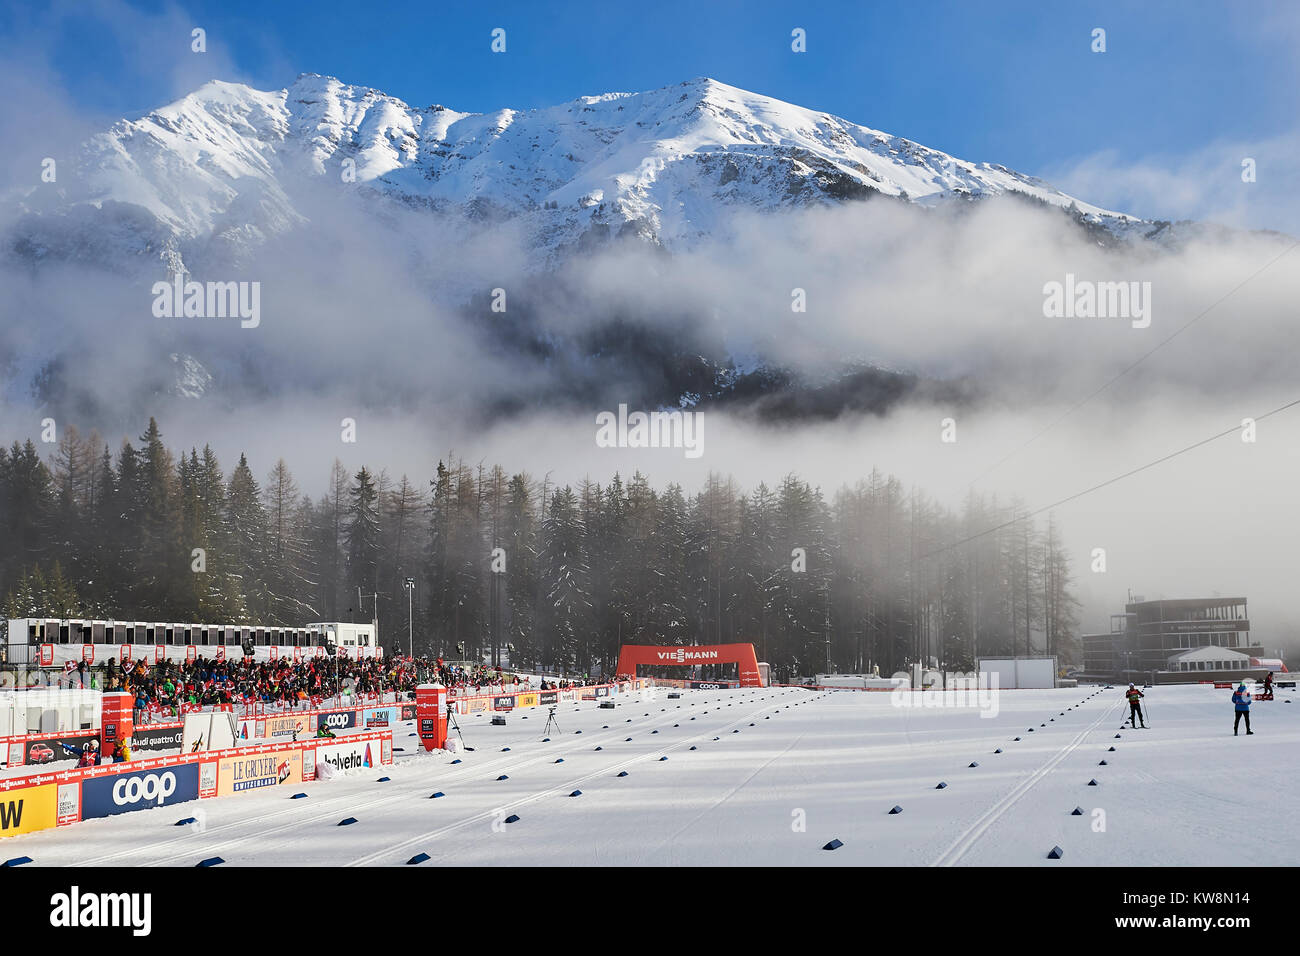 Lenzerheide, Switzerland, 31st December 2017. The Biathlon Arena is ready for the Mens 15 km Classic Competition at the FIS Cross Country World Cup Tour de Ski 2017 in Lenzerheide. Photo: Cronos/Rolf Simeon Stock Photo